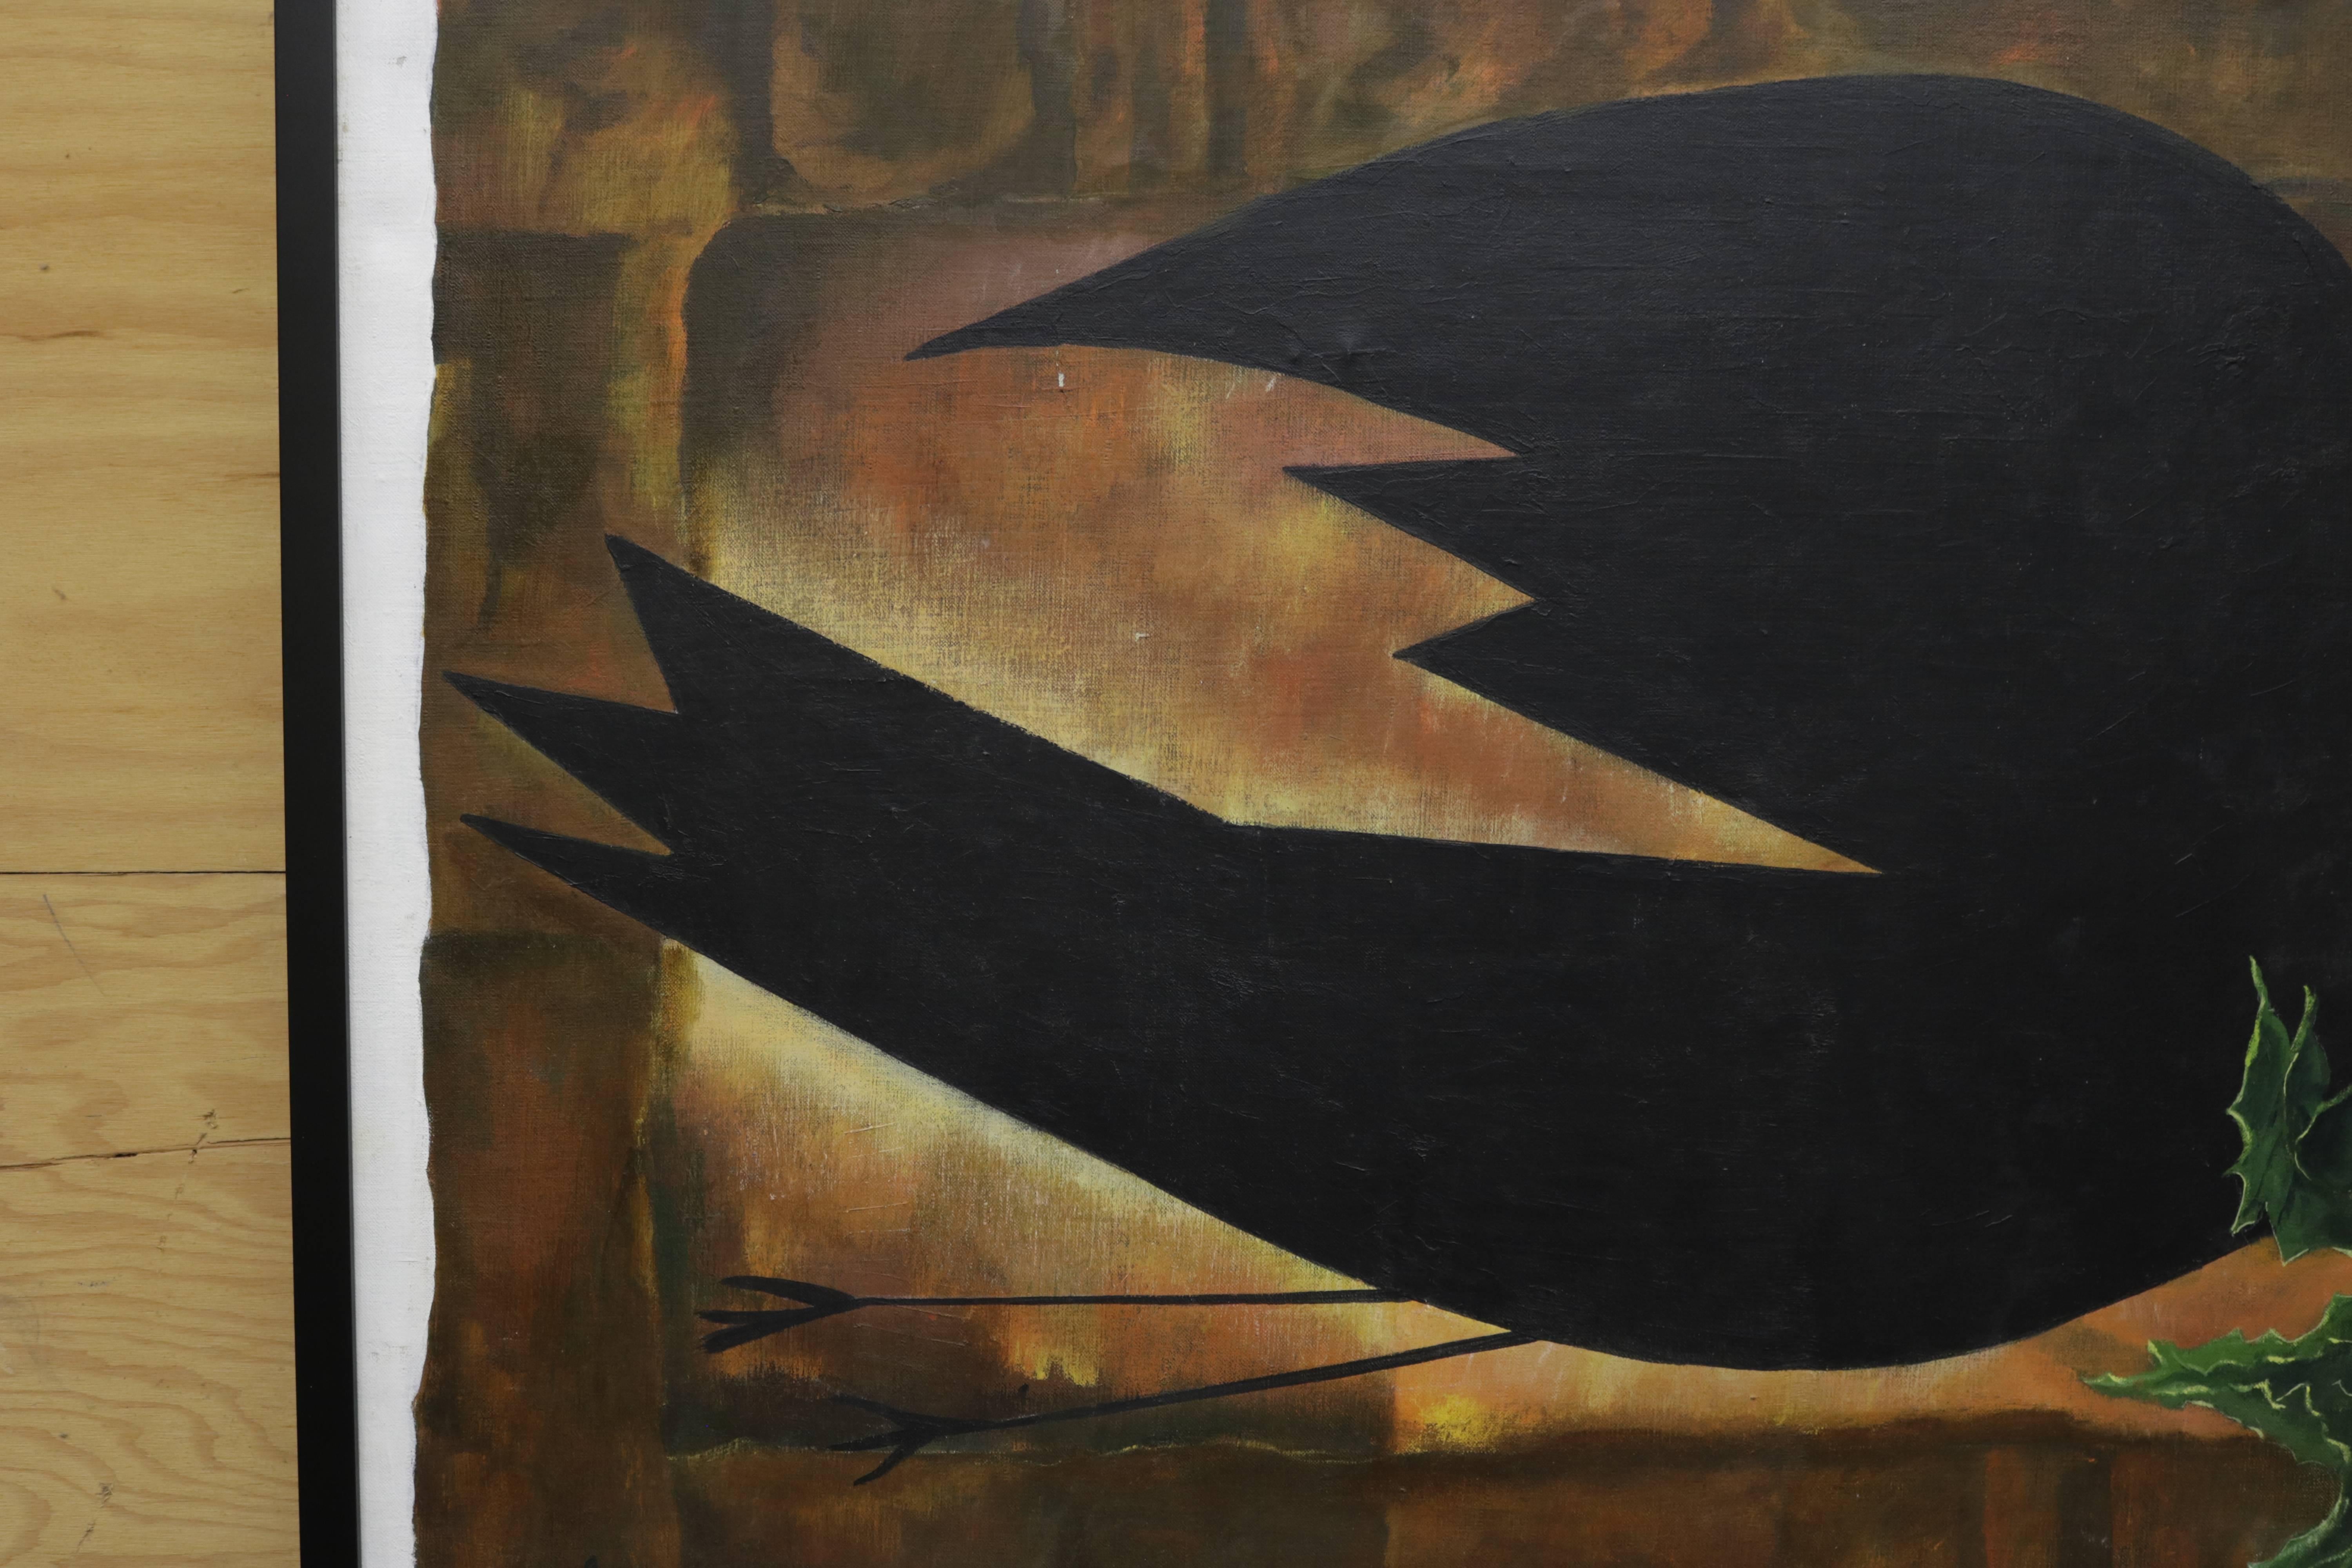 American Dove Holding a Branch Oil Painting by David Segel